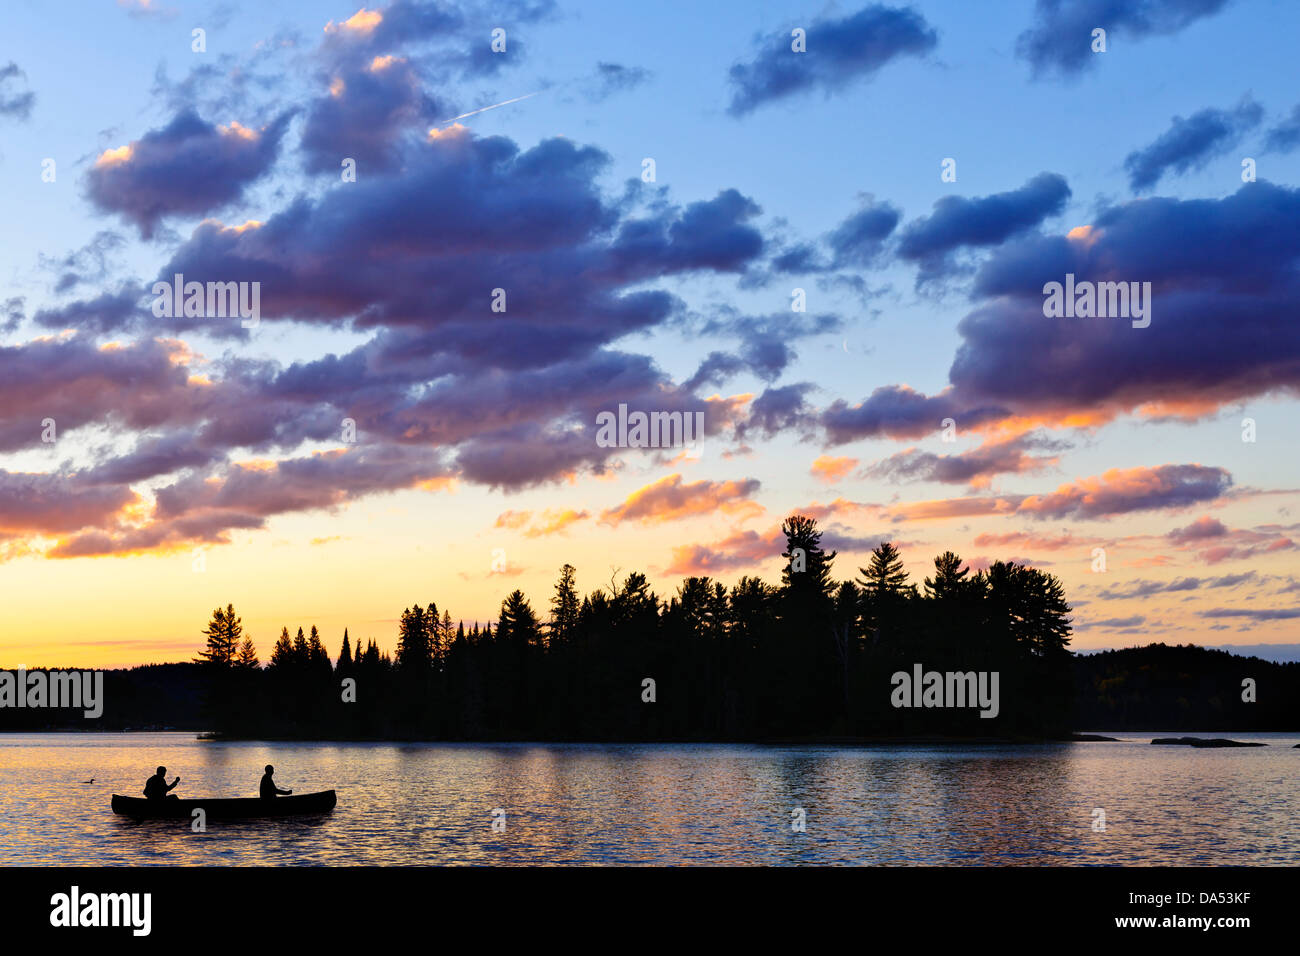 Silhouette of island and canoe on lake at sunset in Algonquin Park, Canada Stock Photo